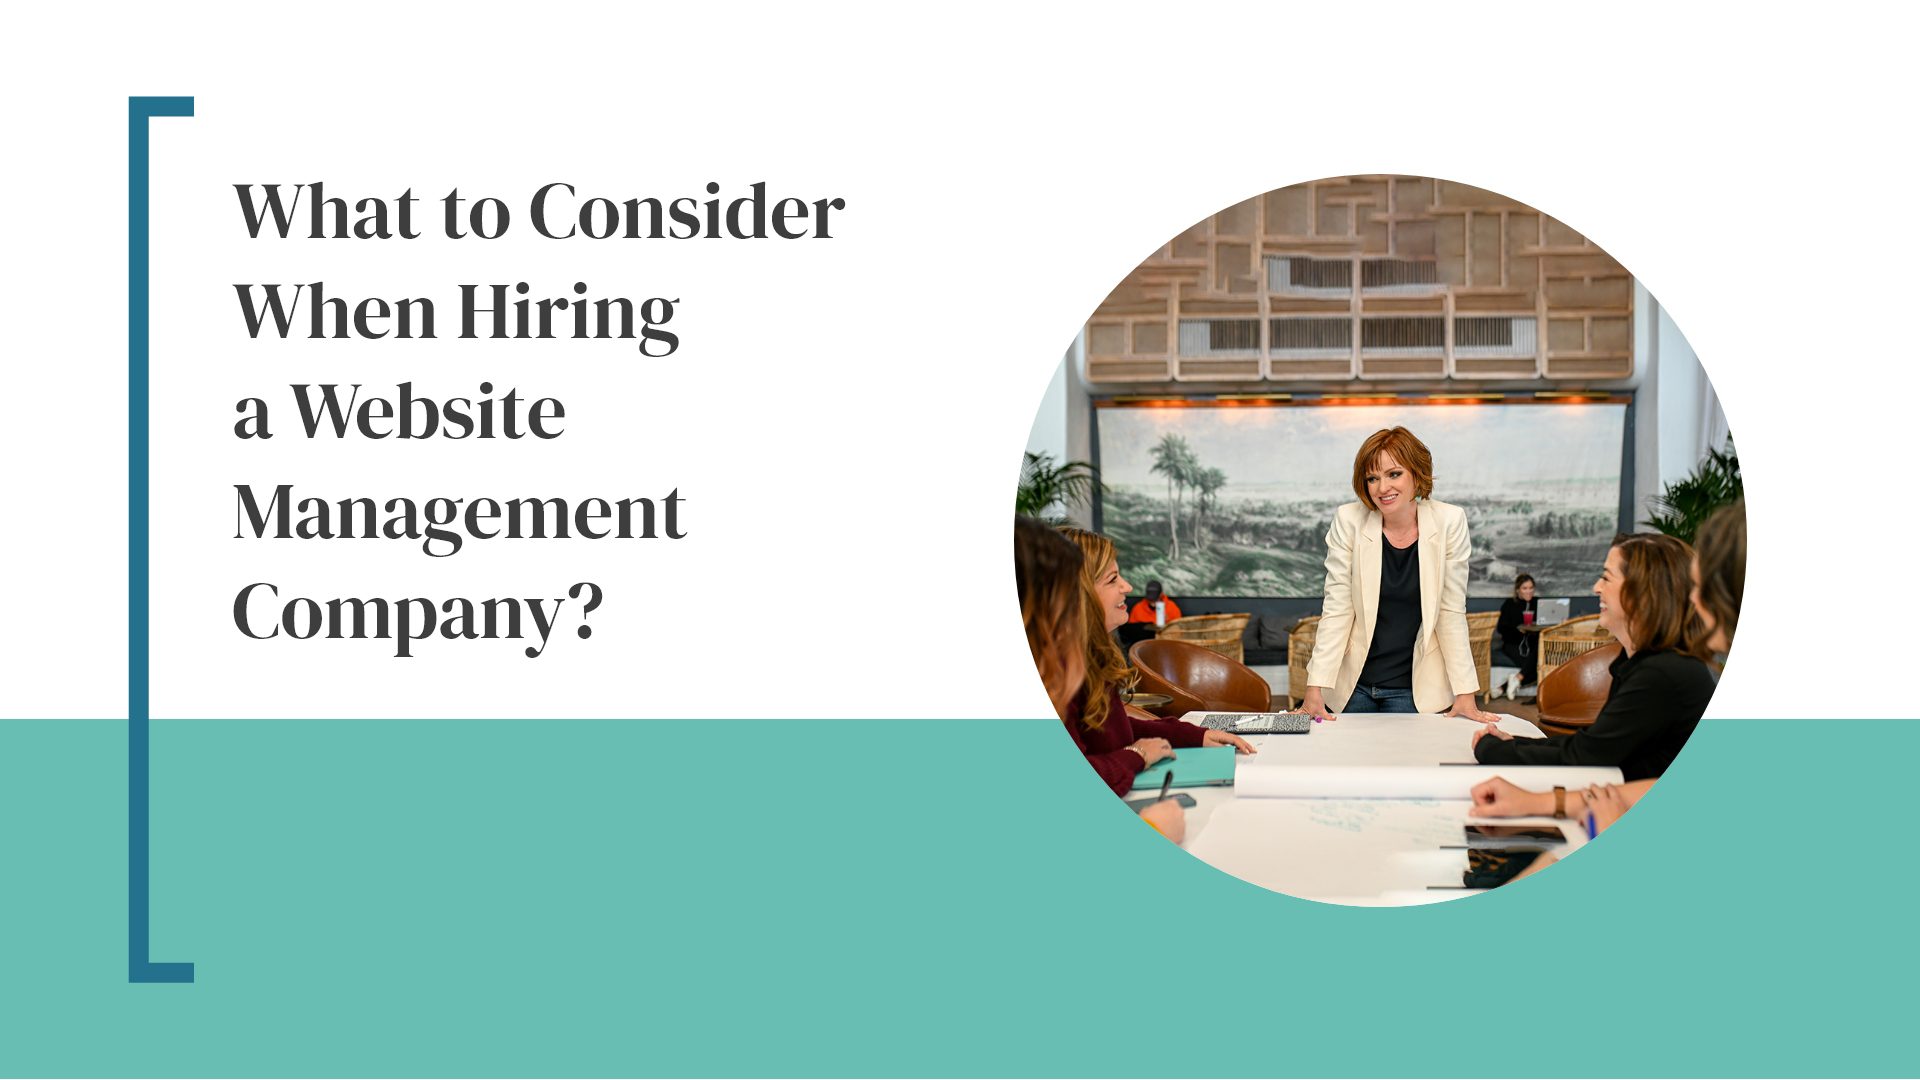 What to consider when hiring a website management company?